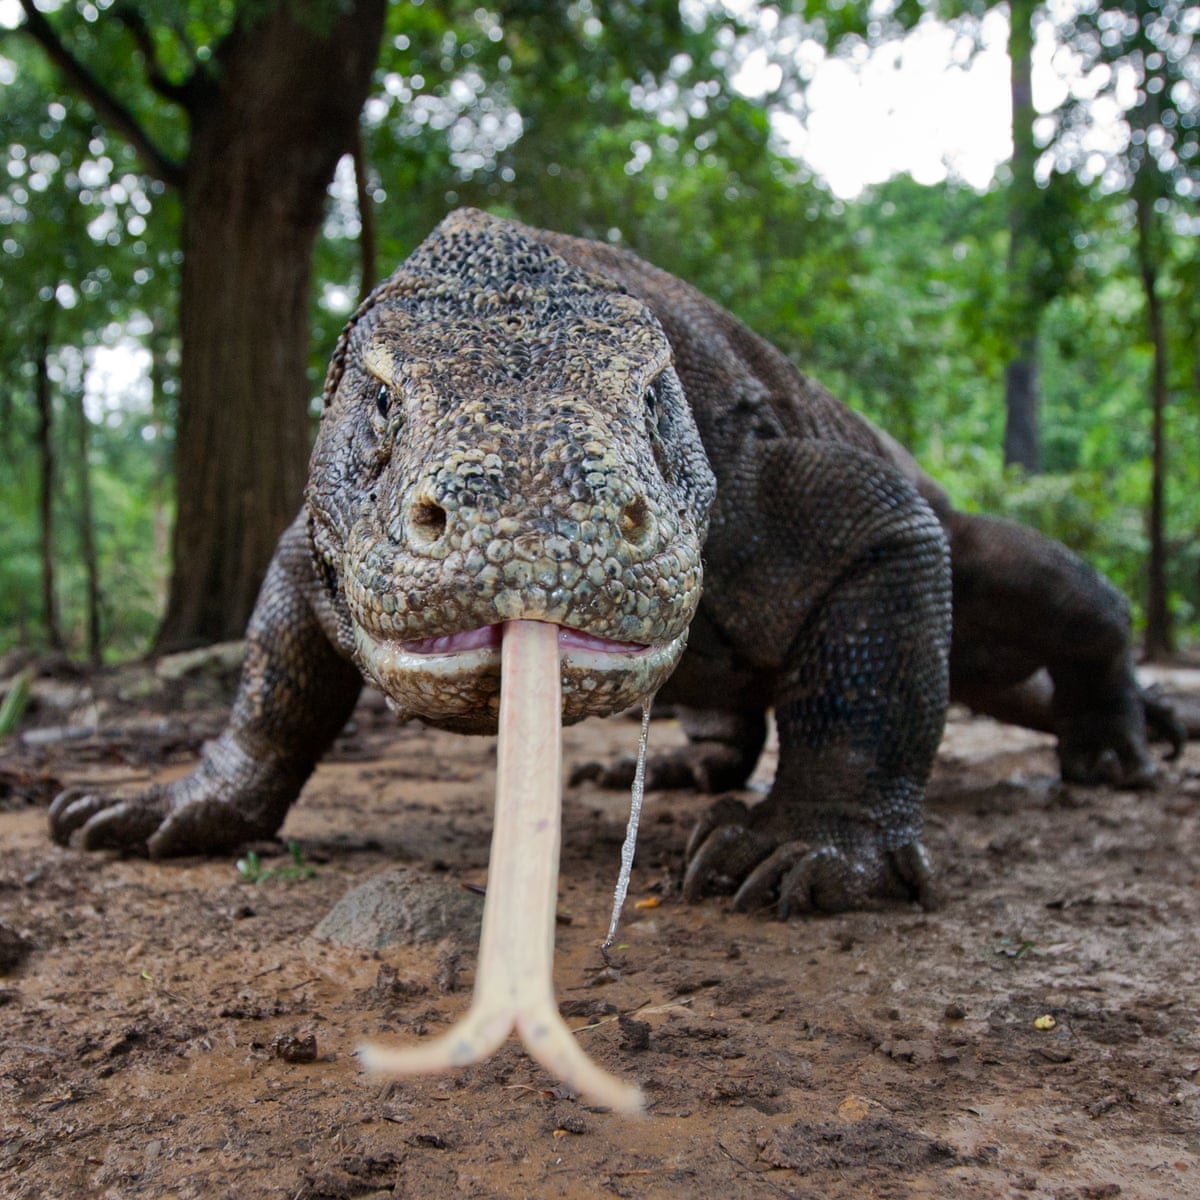 Here be dragons: the million-year journey of the Komodo dragon | Science |  The Guardian